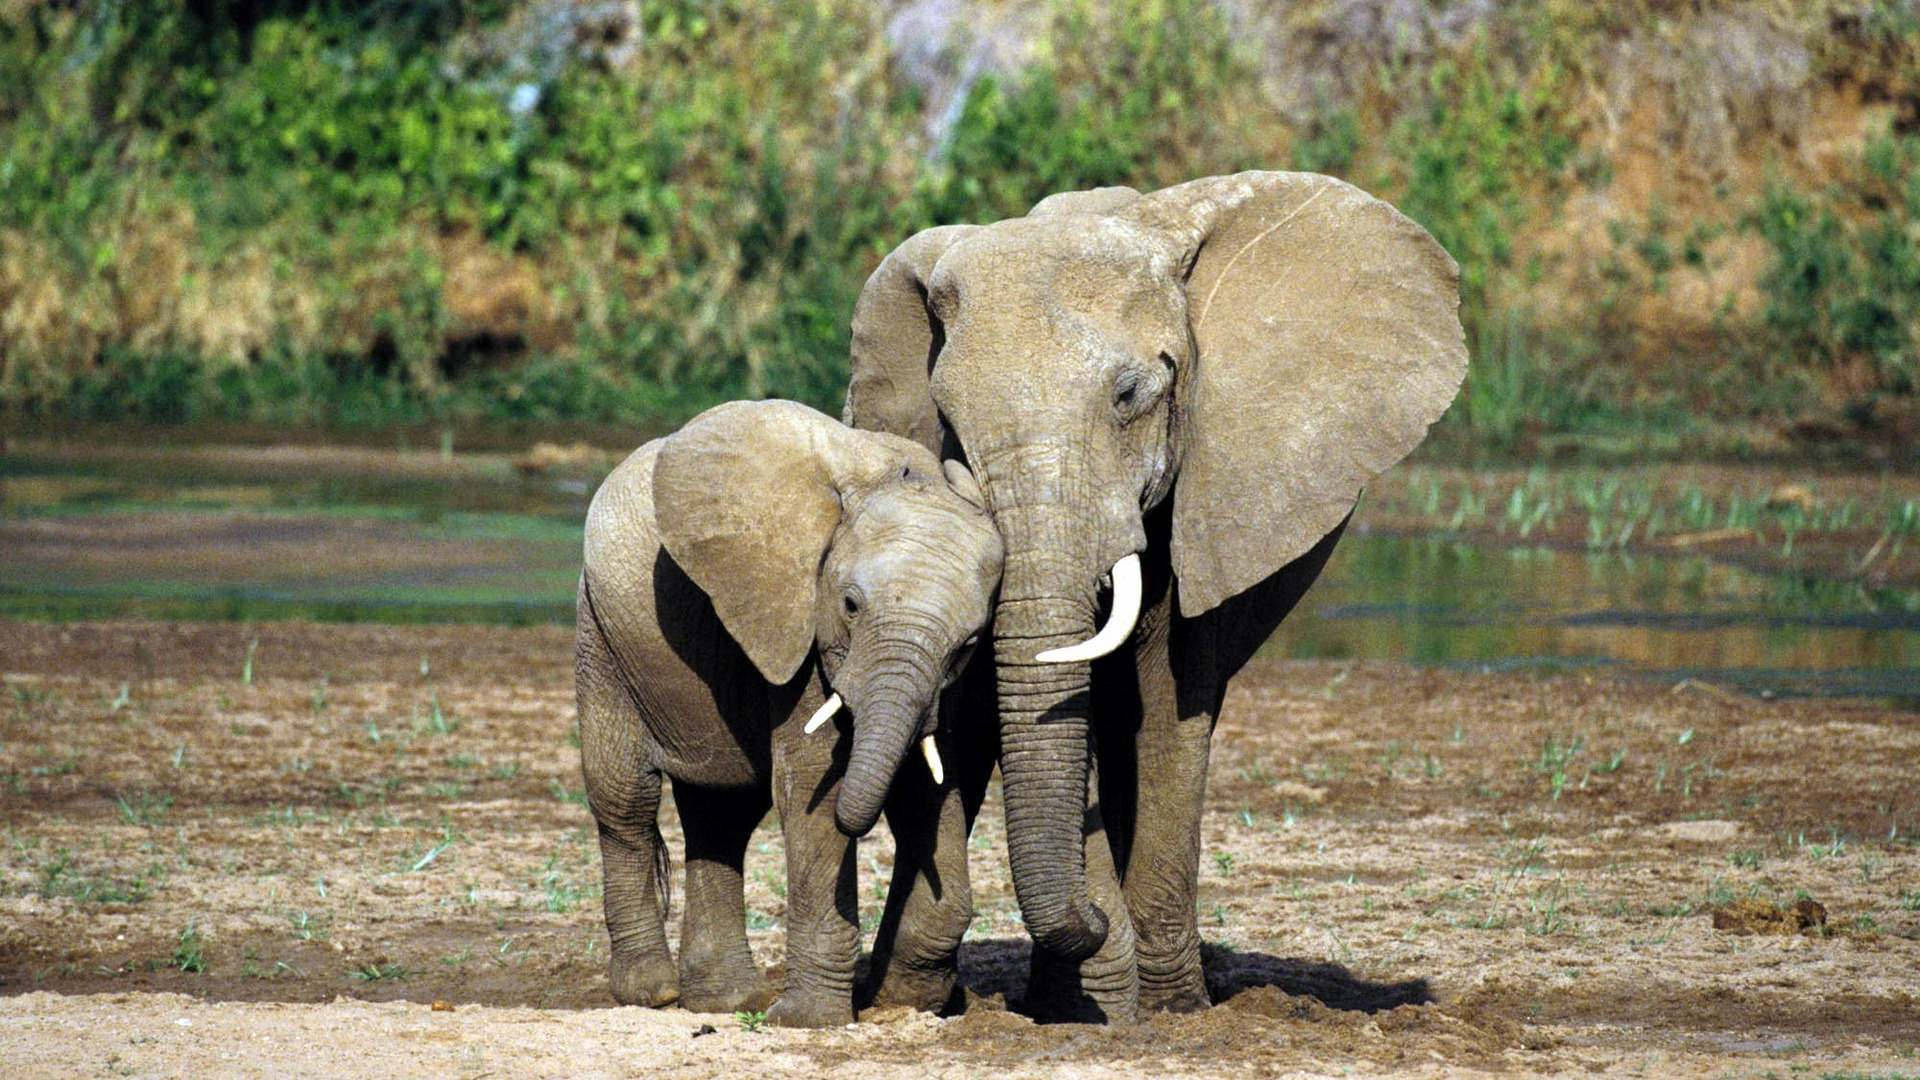 A Caring Mother Elephant with her Baby Wallpaper